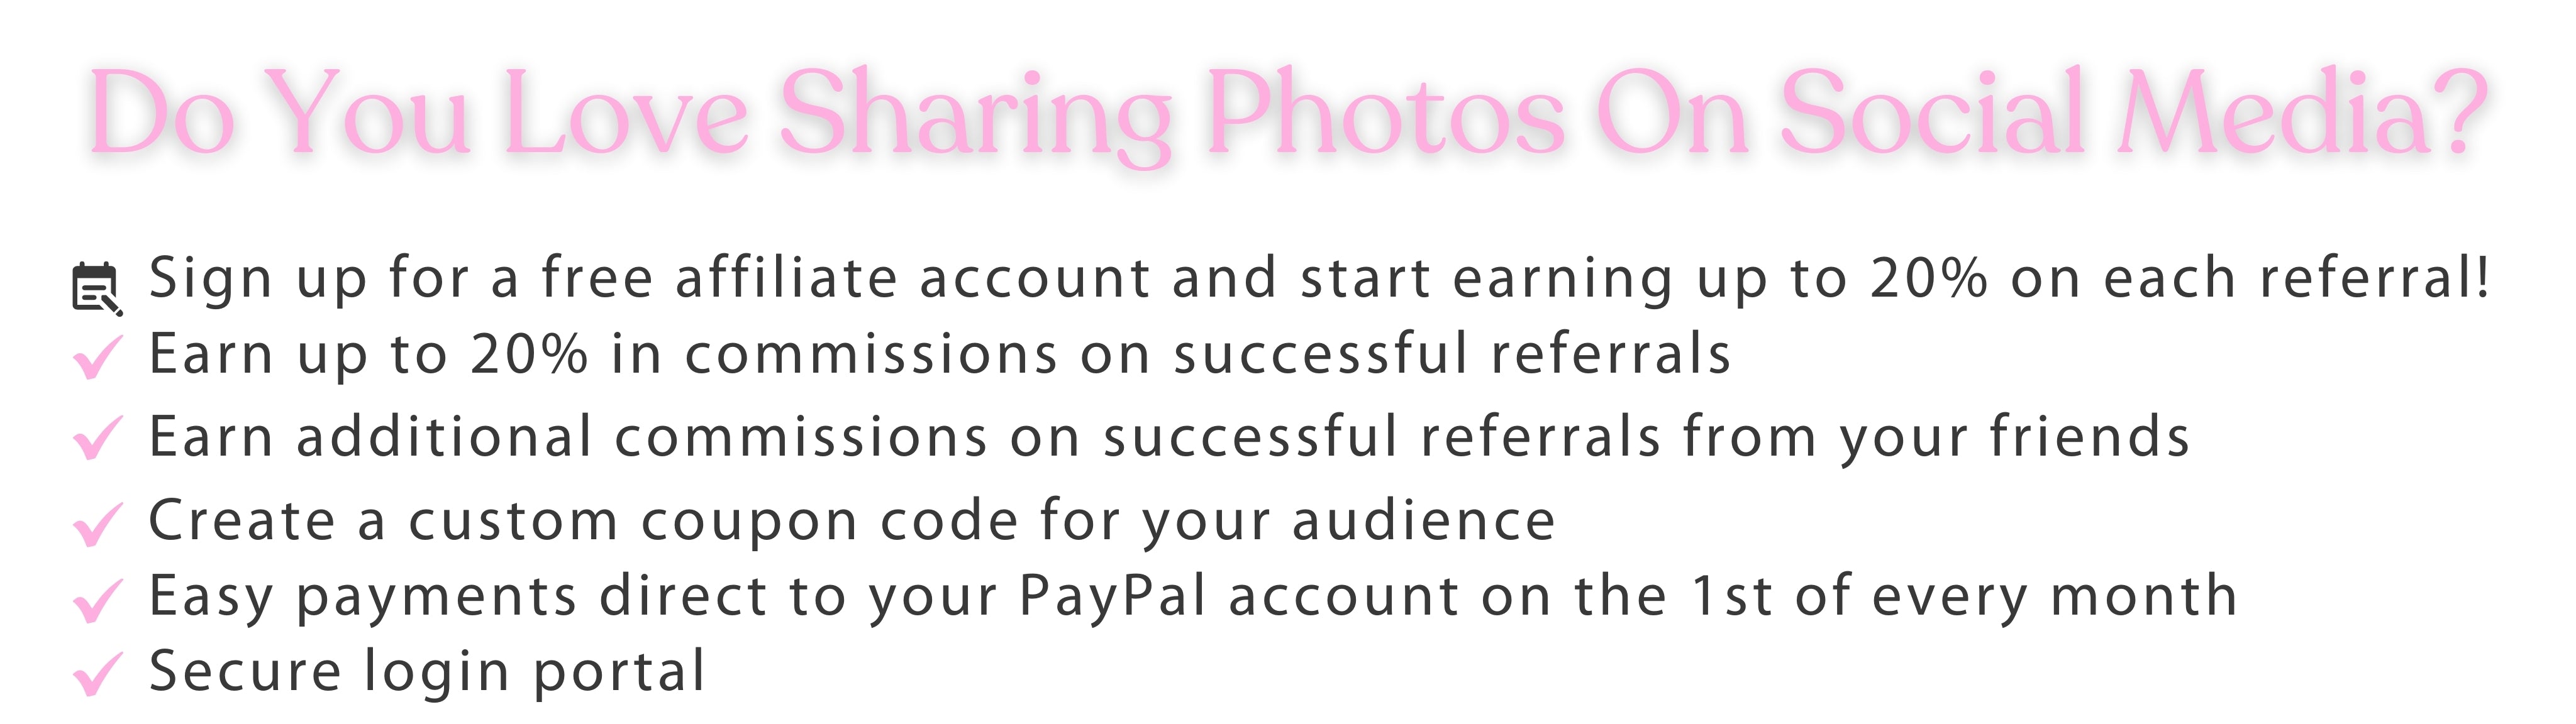 Sign up for a free affiliate account and start earning up to 20% on each referral! Earn up to 20% in commissions on successful referrals Earn additional commissions on successful referrals from your friends